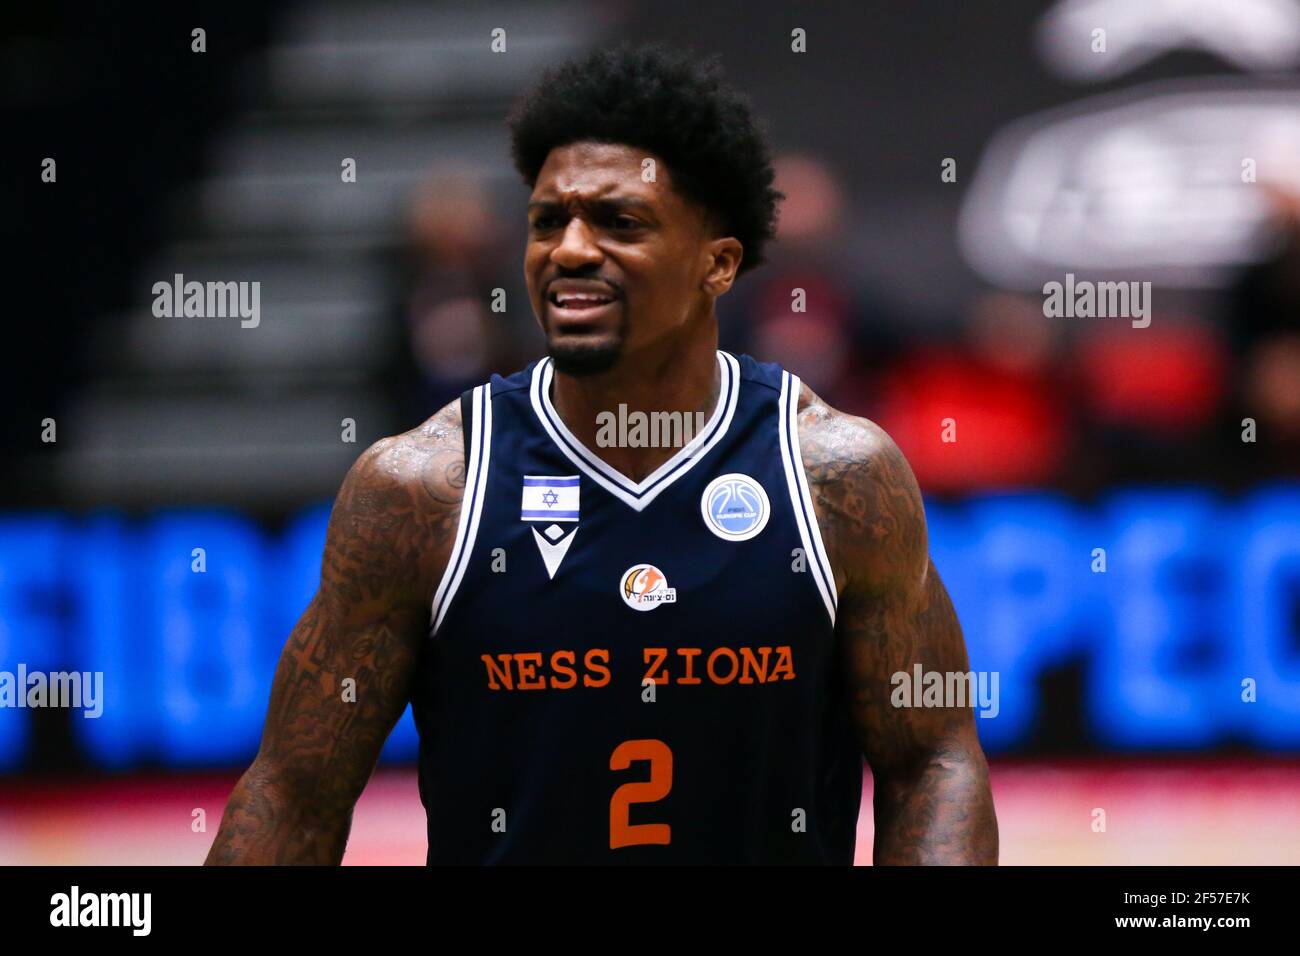 DEN BOSCH, NETHERLANDS - MARCH 24: Patrick Miller of Ironi Ness Ziona during the Fiba Europe Cup game between Ironi Ness Ziona and BC Kyiv Basket at Maaspoort on March 24, 2021 in Den Bosch, Netherlands (Photo by Rene Nijhuis/Orange Pictures)*** Local Caption *** Patrick Miller Stock Photo